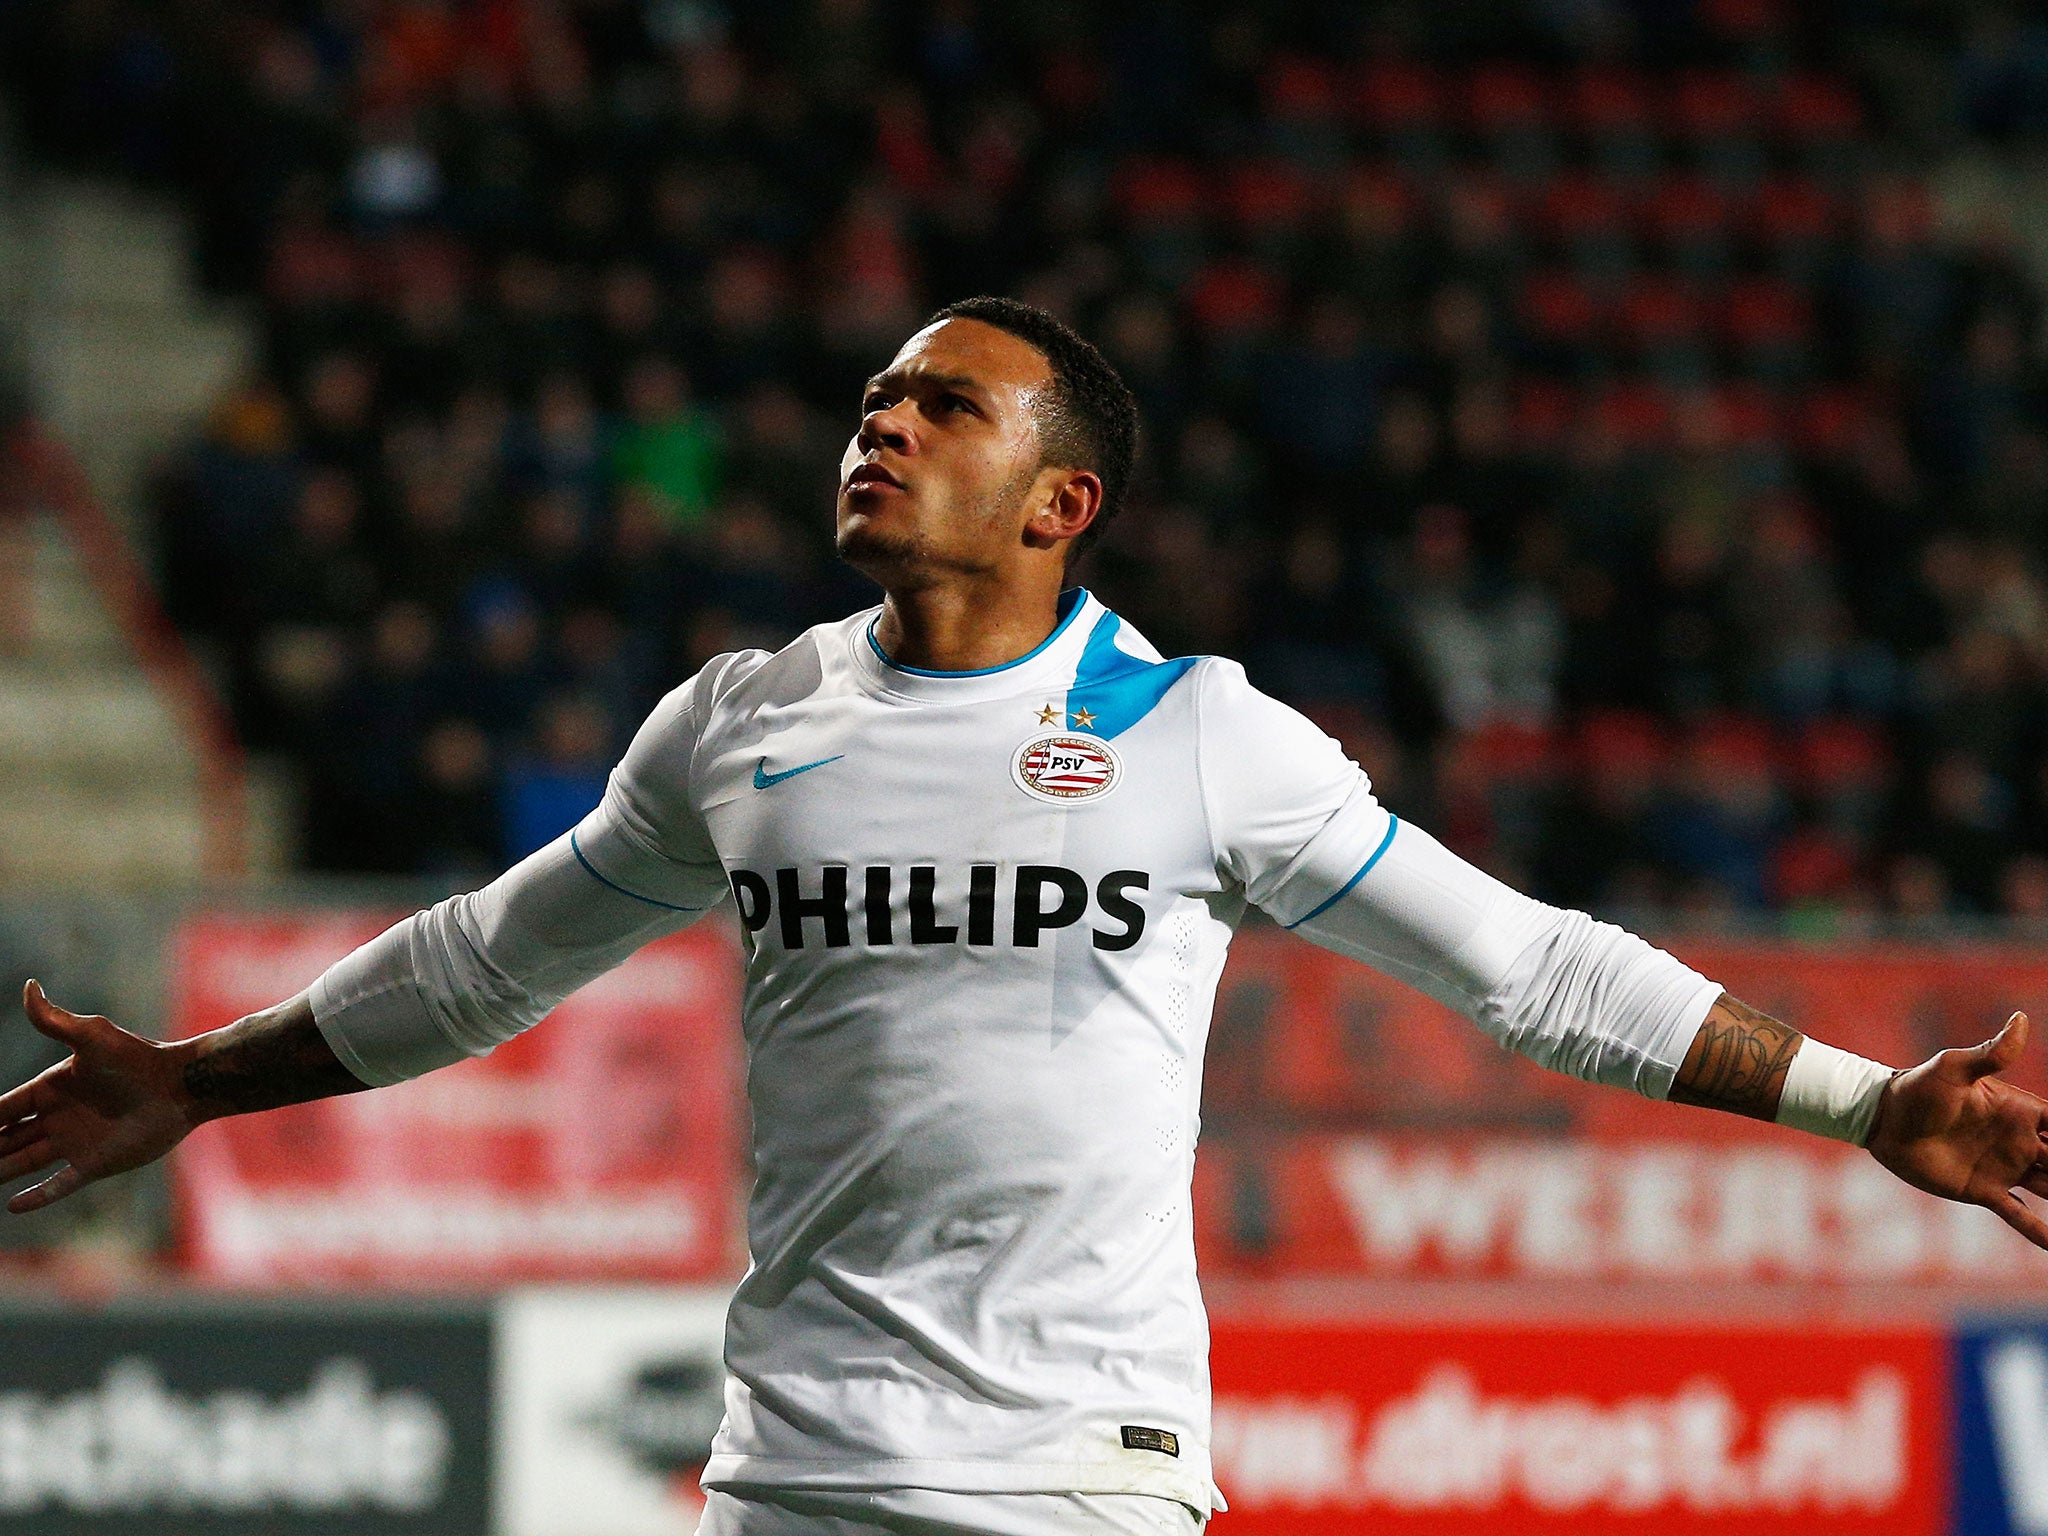 Memphis Depay will join Manchester United for £25m